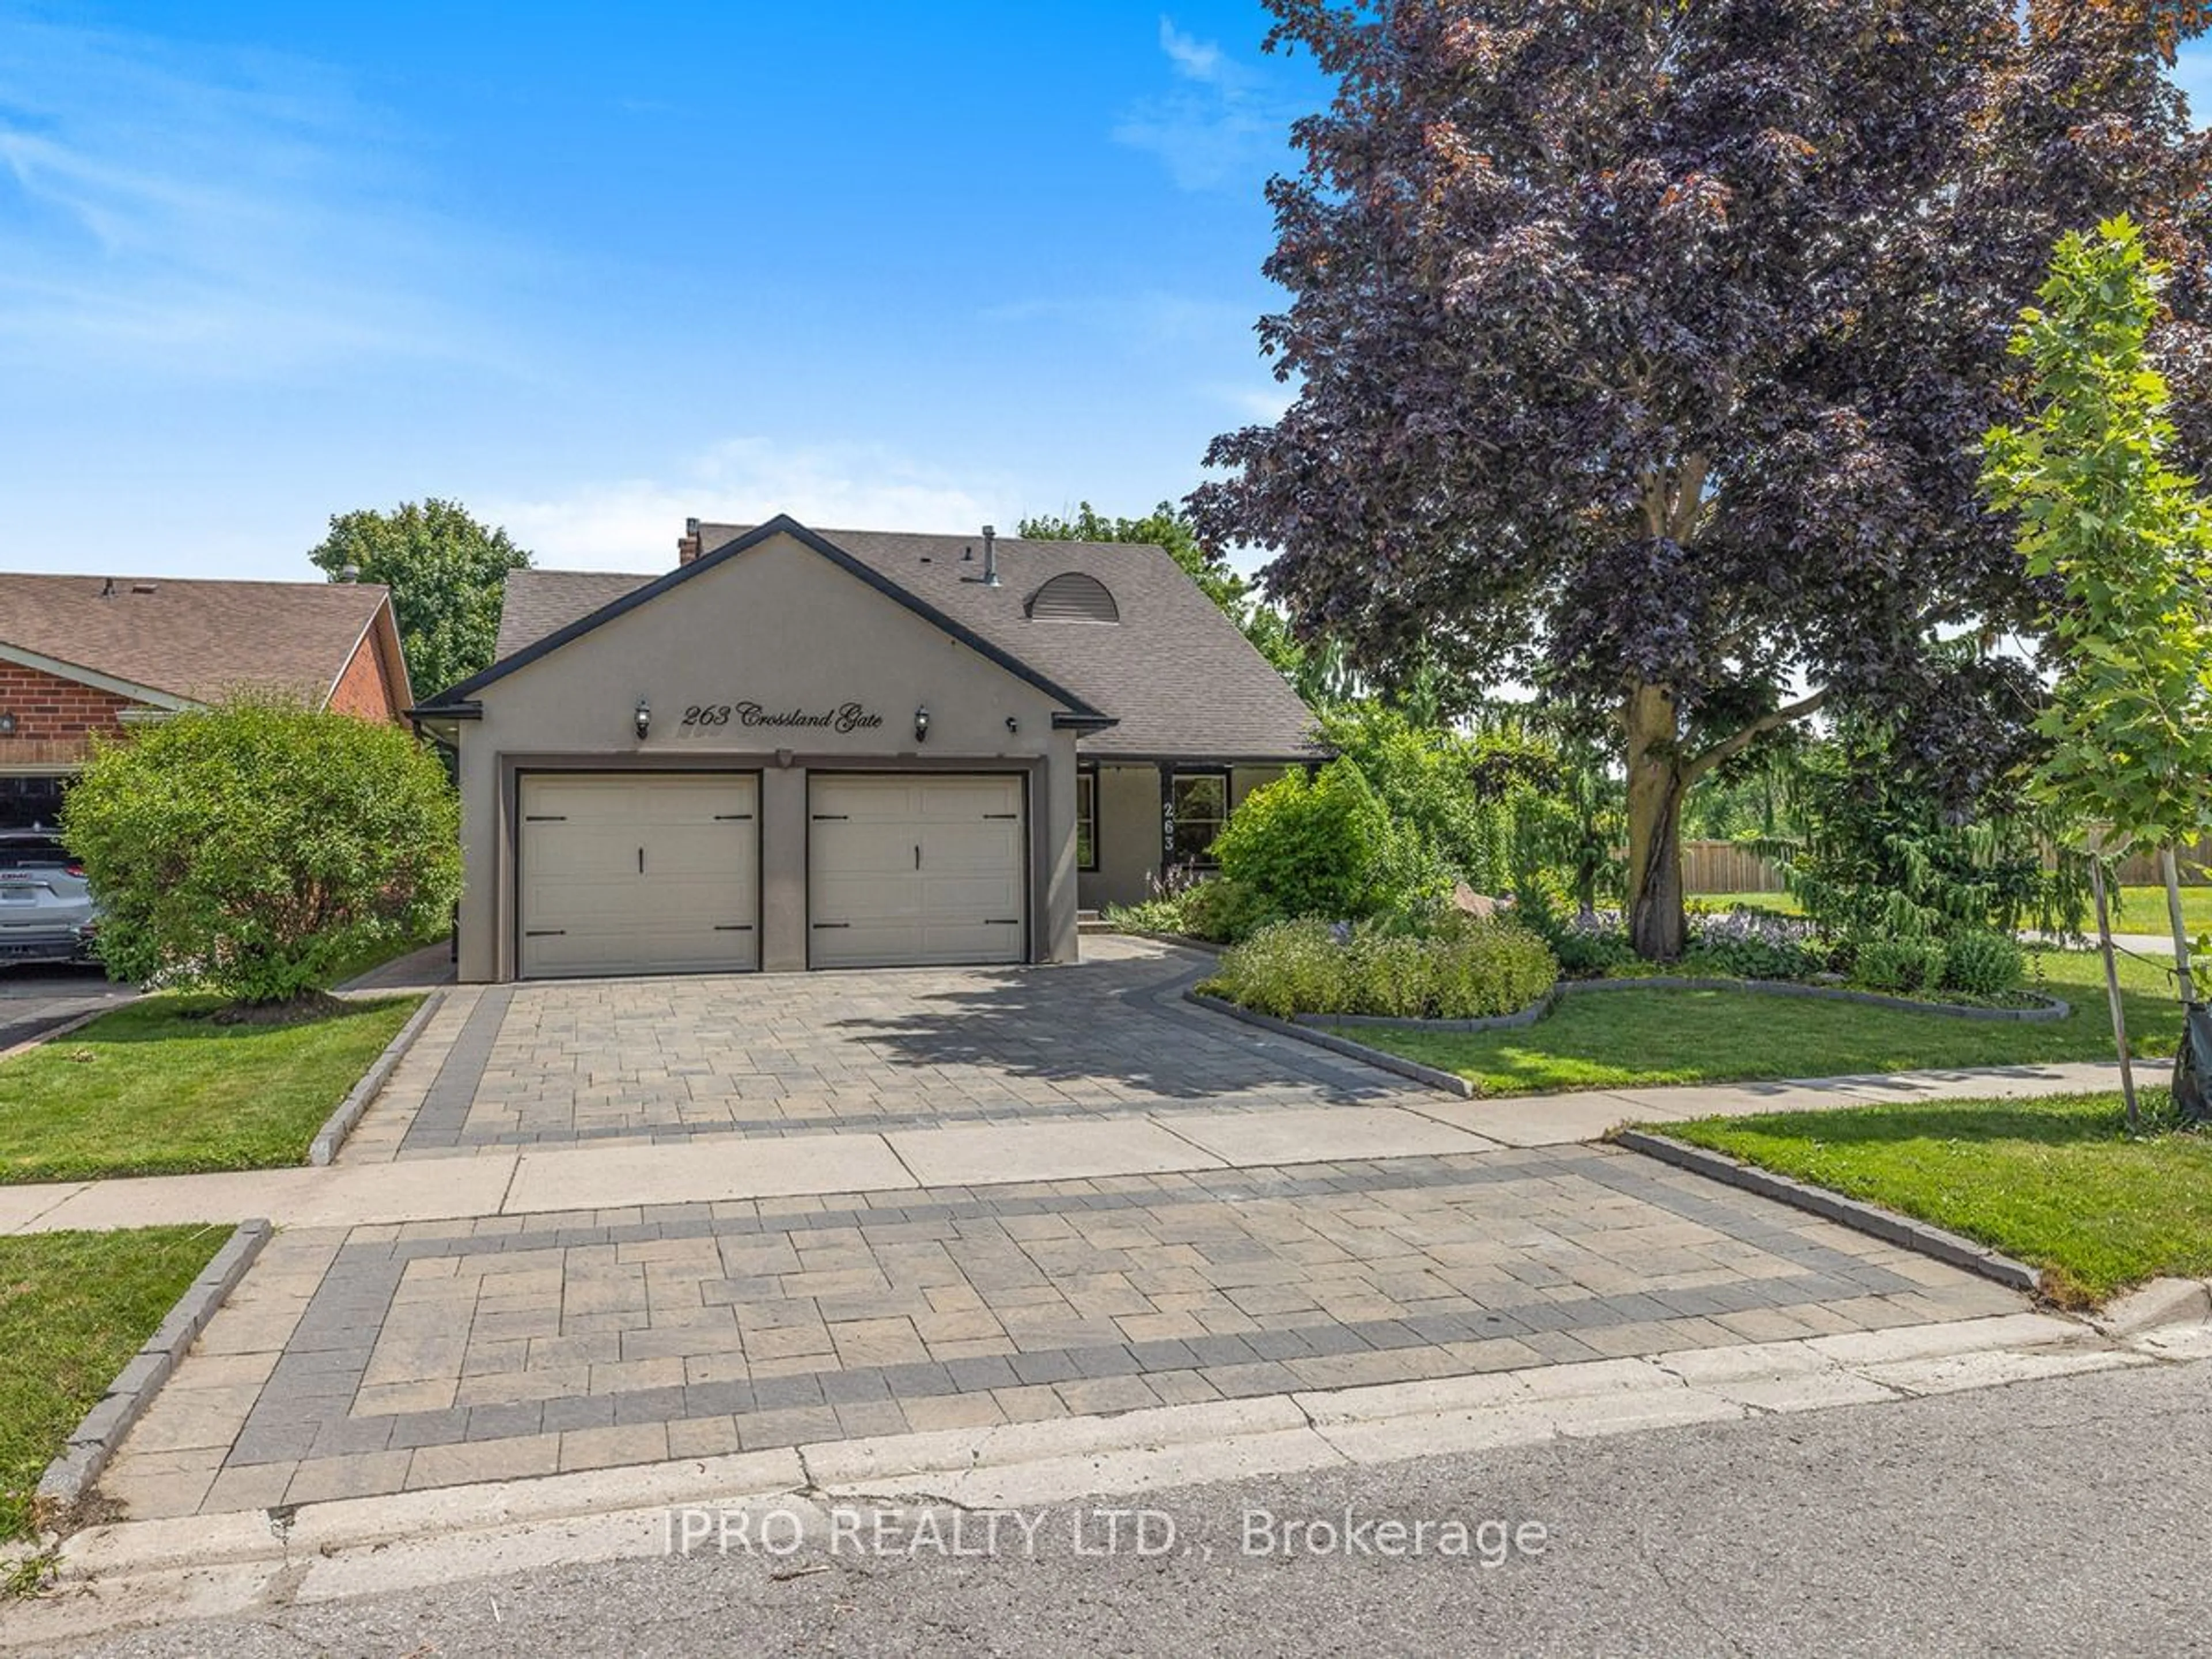 Frontside or backside of a home for 263 Crossland Gate, Newmarket Ontario L3X 1B1